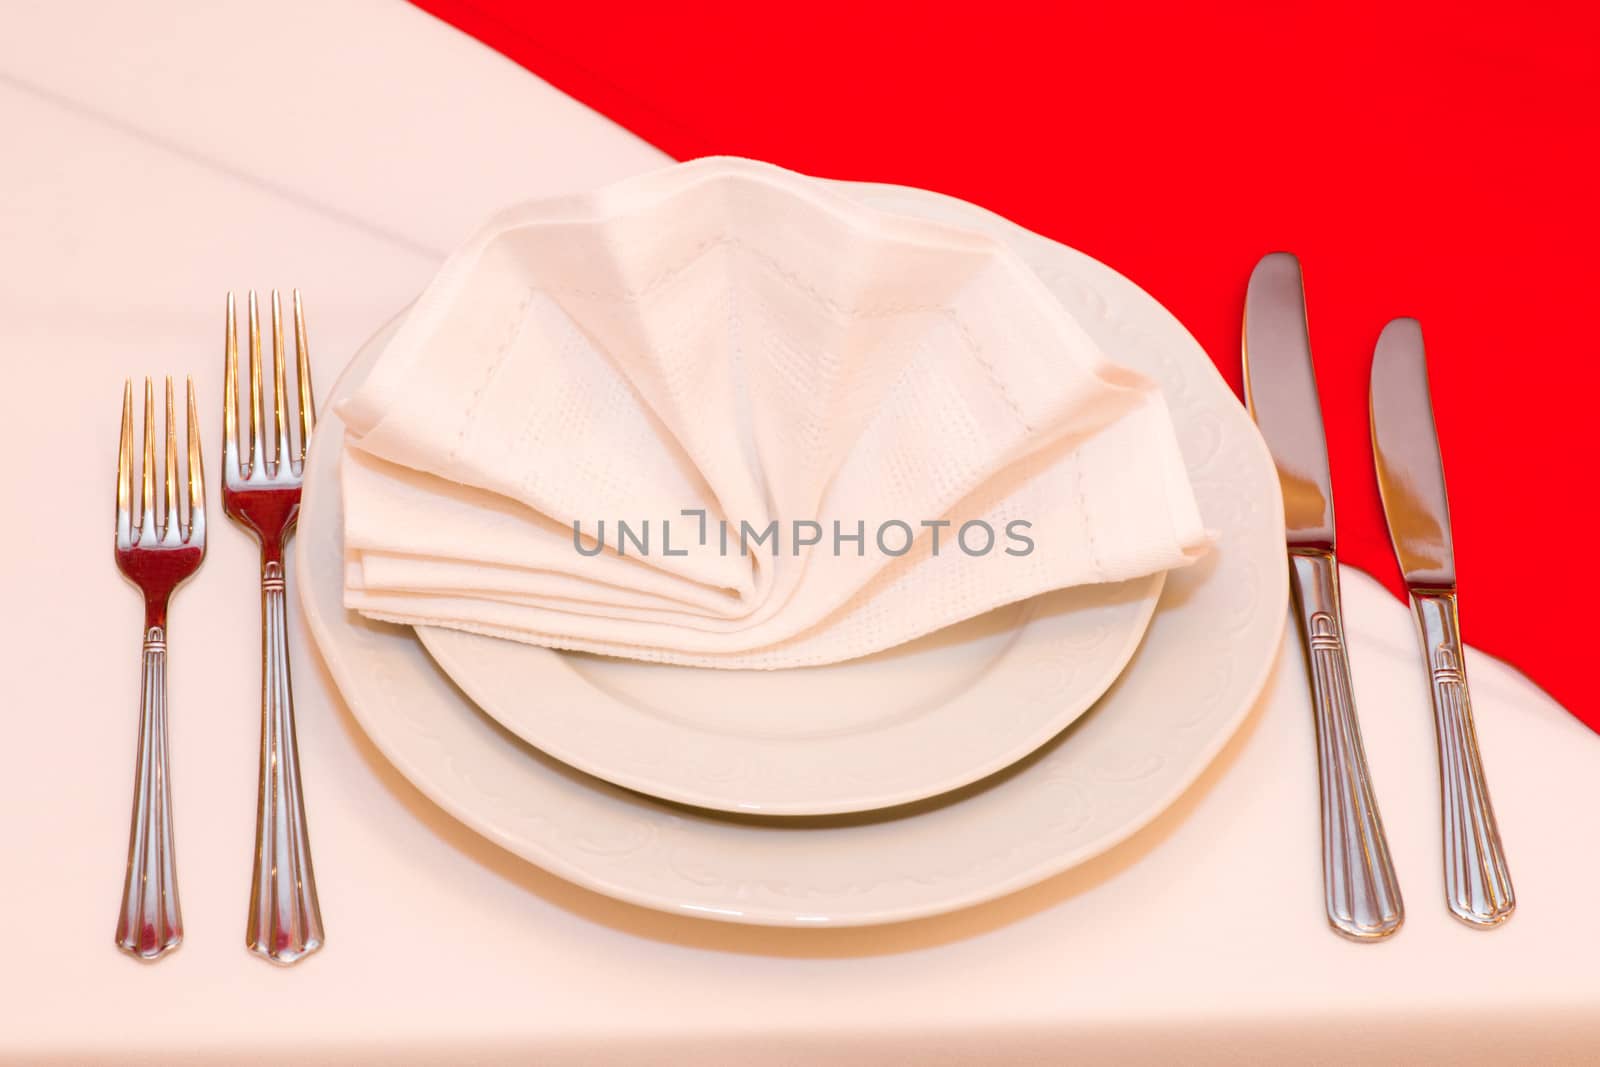 Restaurant. Dinner plate with napkin and a set of flatware.